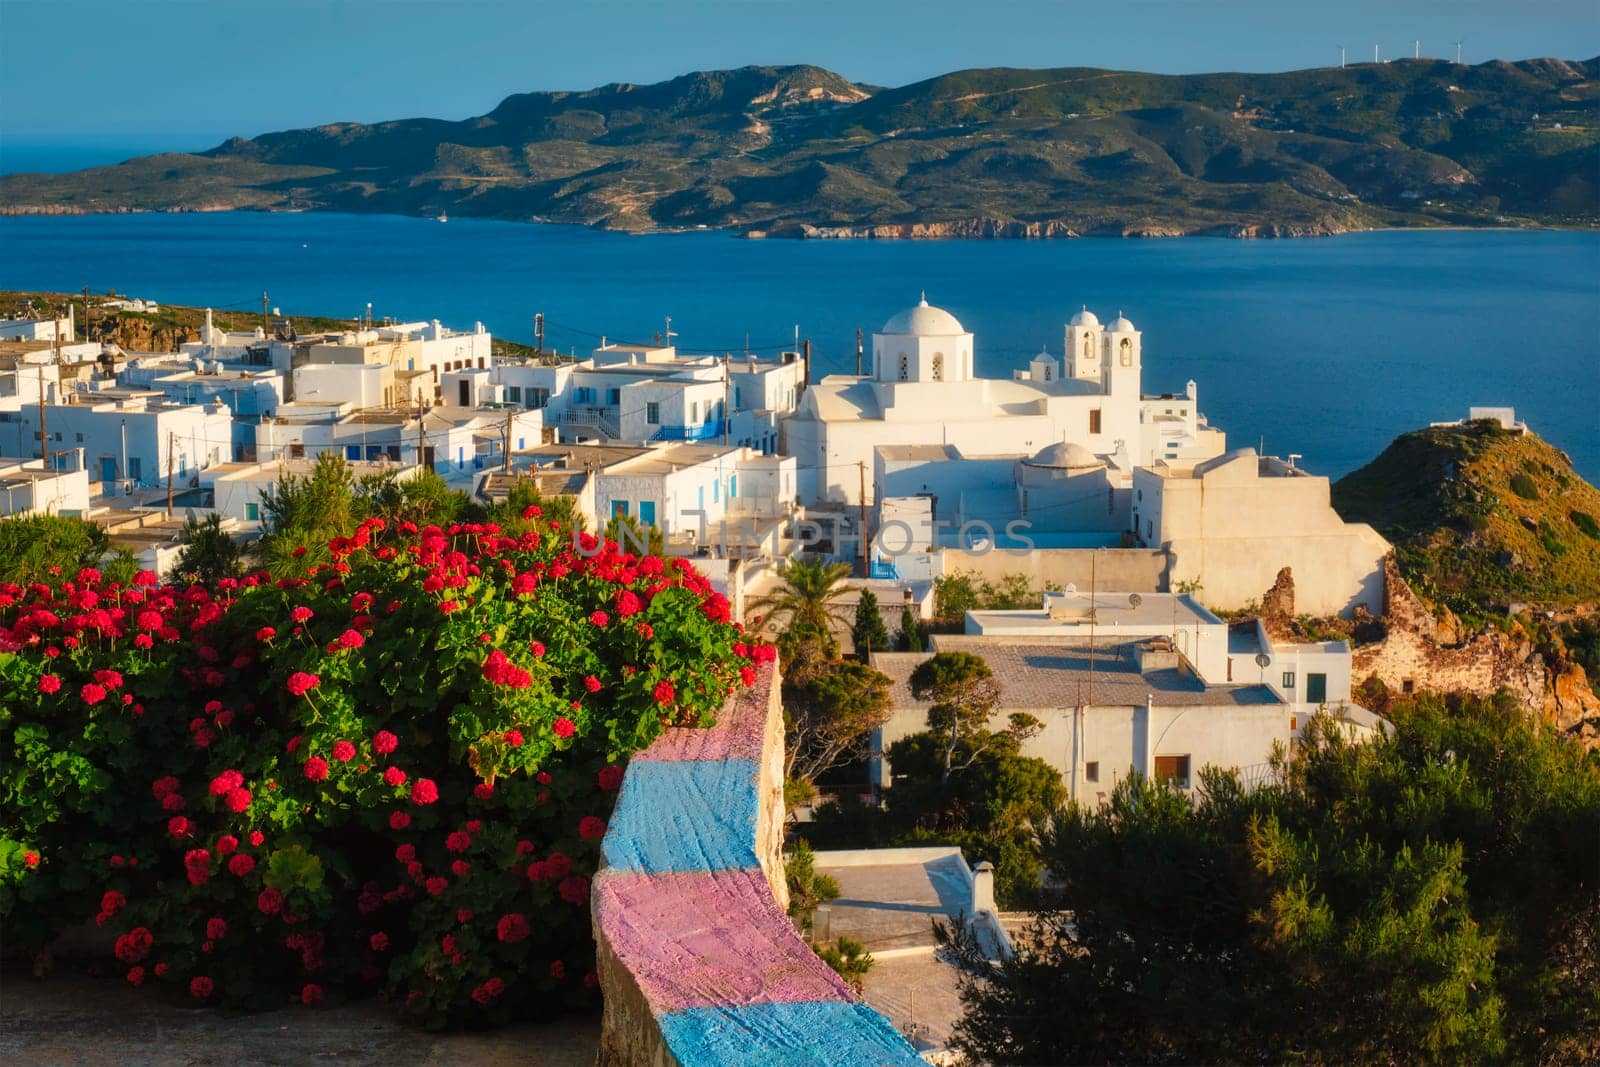 Picturesque scenic view of Greek town Plaka on Milos island over red geranium flowers by dimol